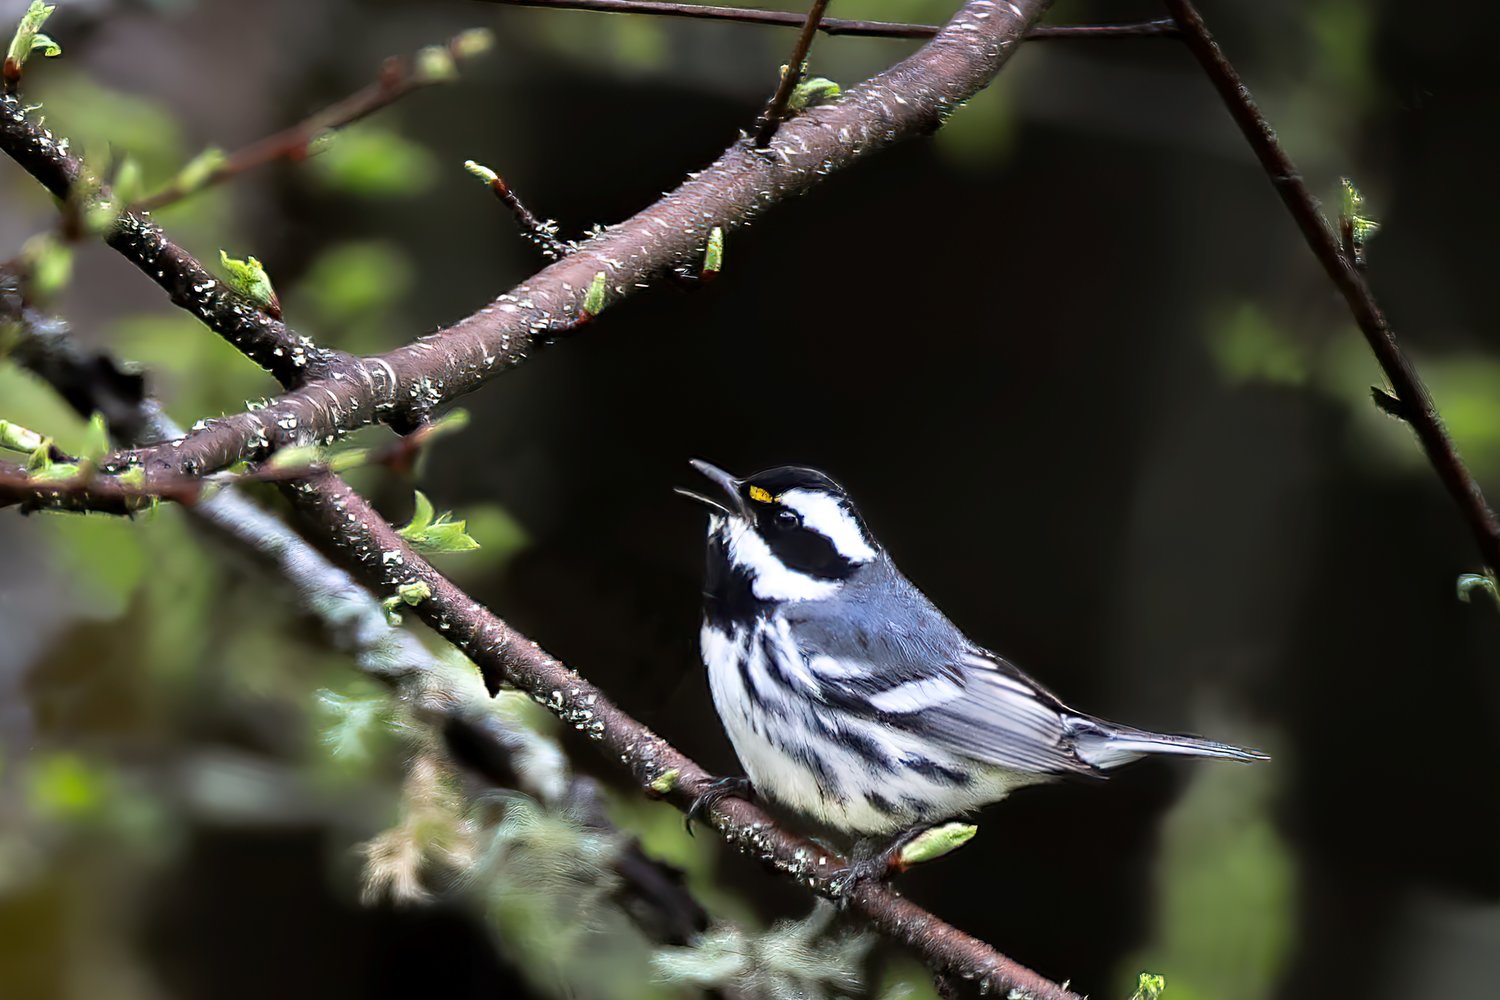 This is the Black-throated Gray Warbler.